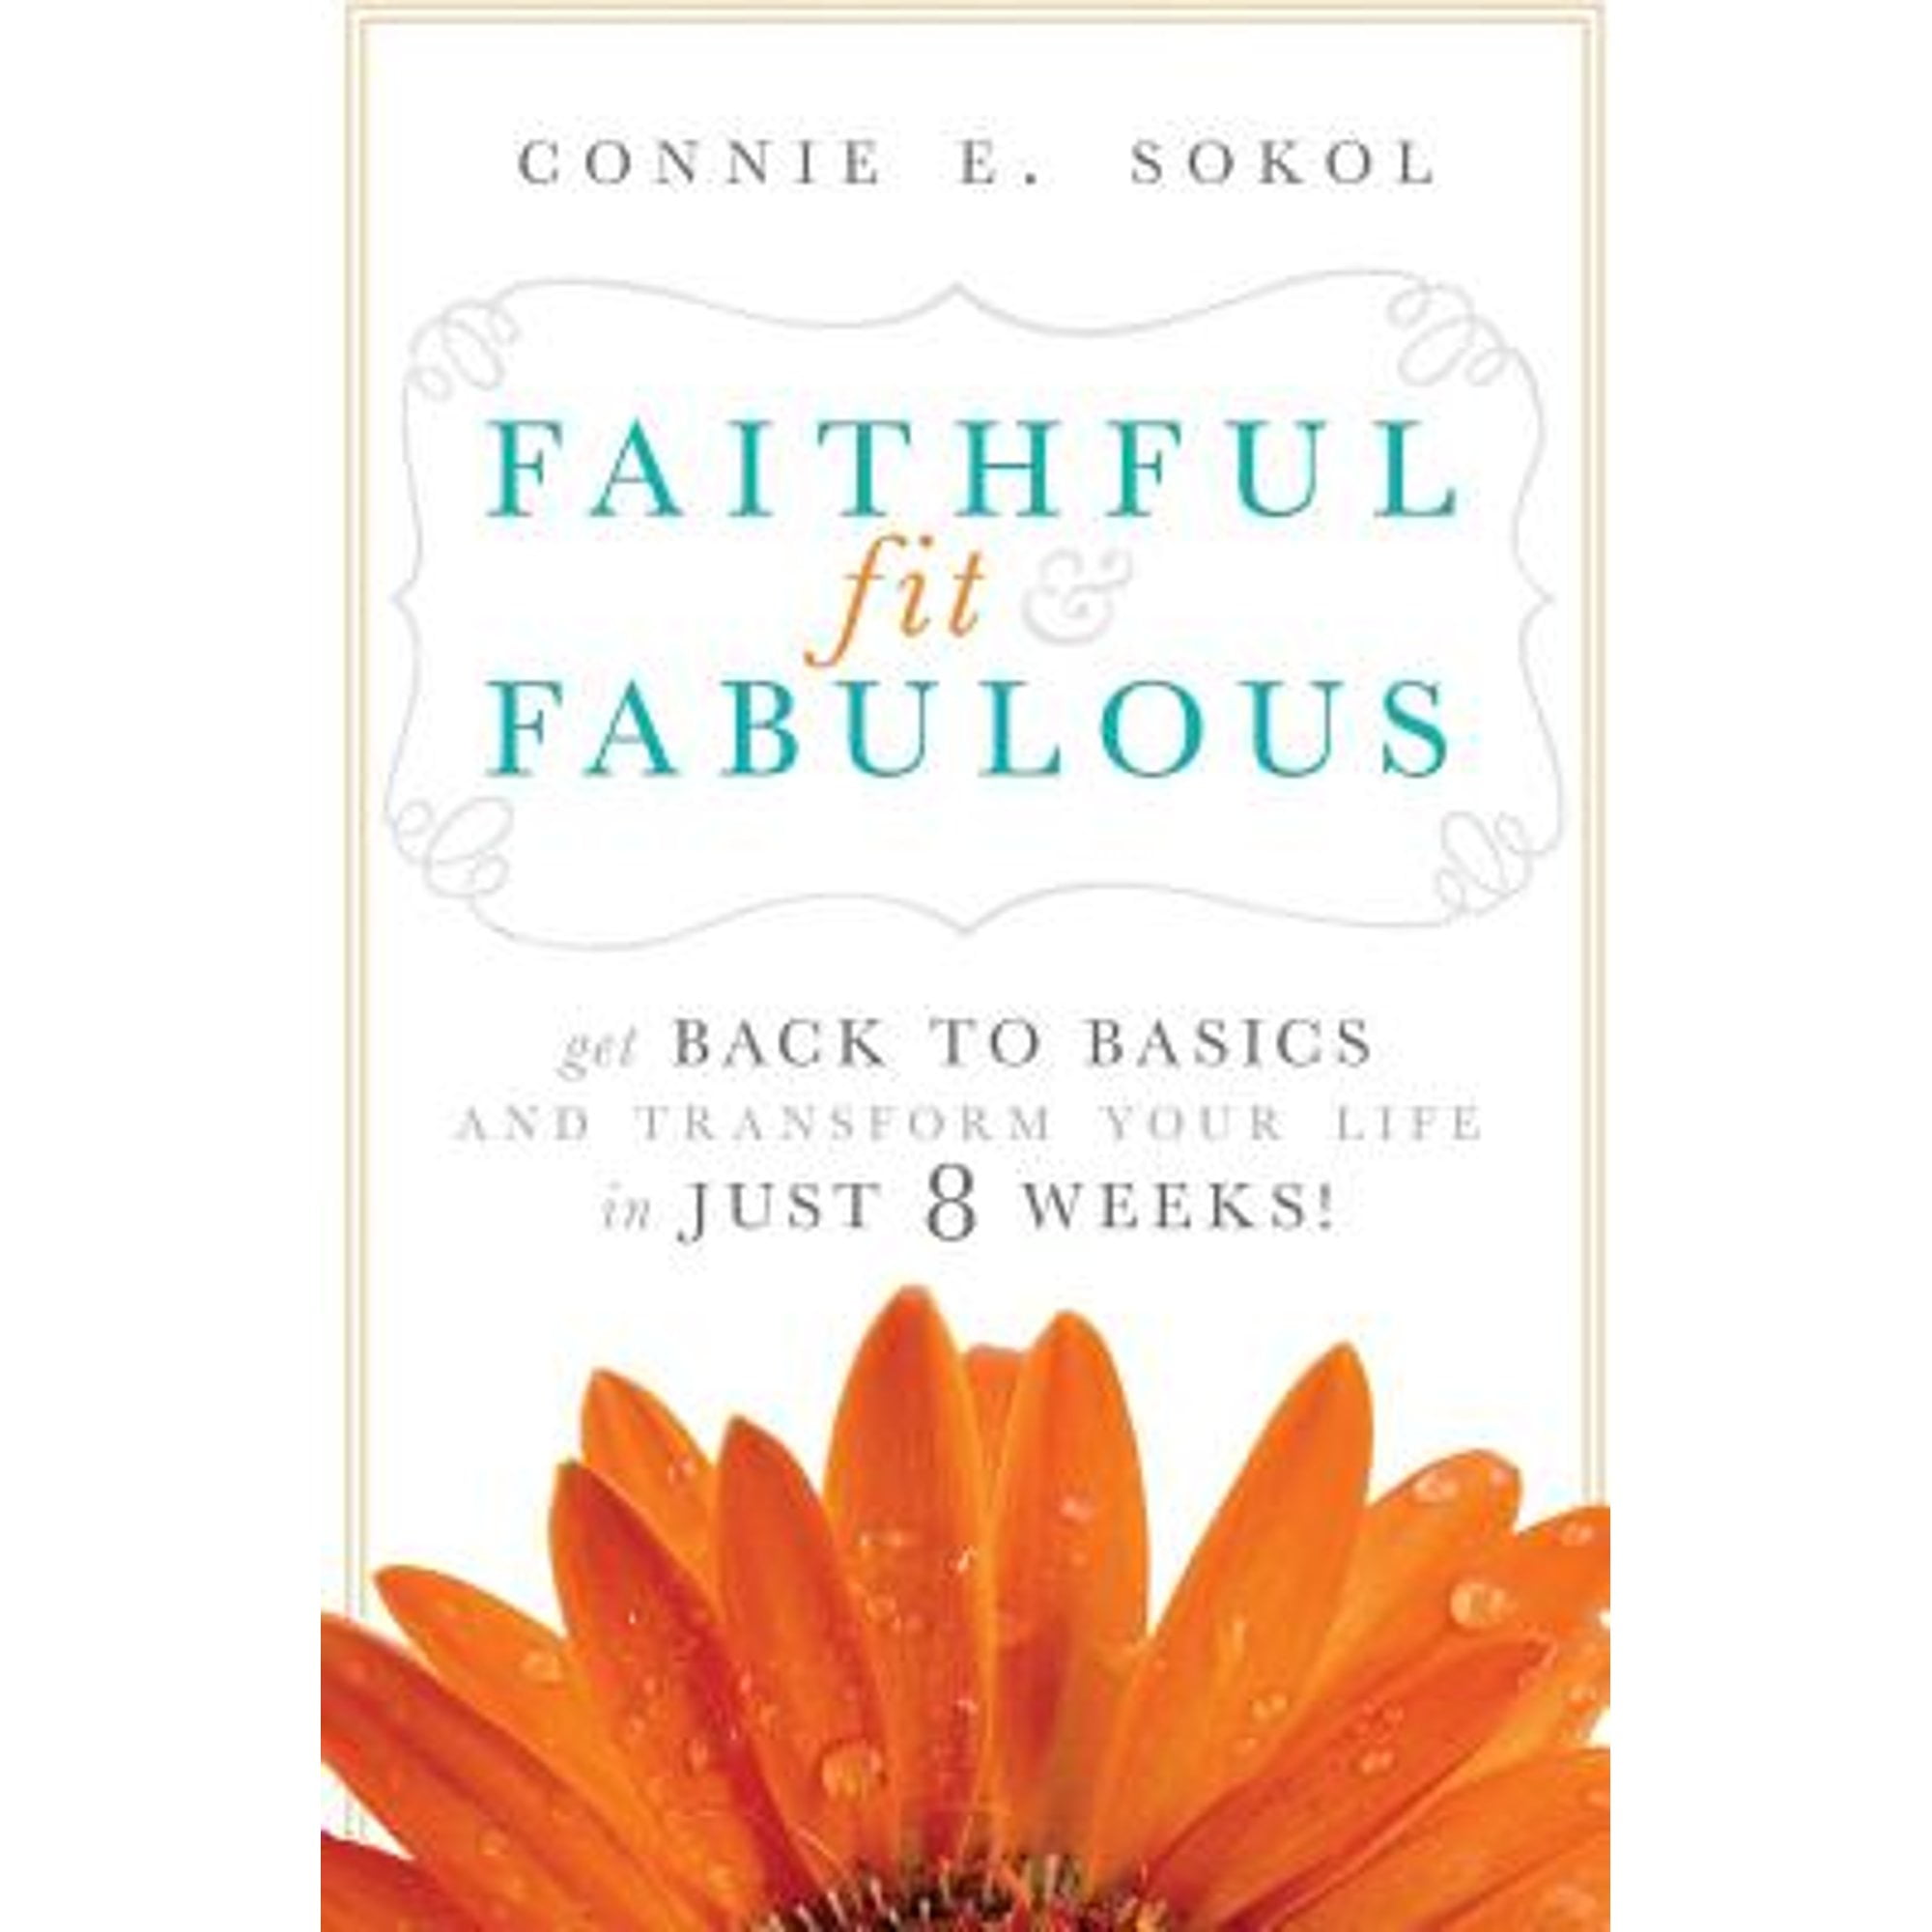 Pre-Owned Faithful, Fit & Fabulous: Get Back to Basics and Transform Your Life in Just 8 Weeks (Paperback 9780998246710) by Connie E Sokol